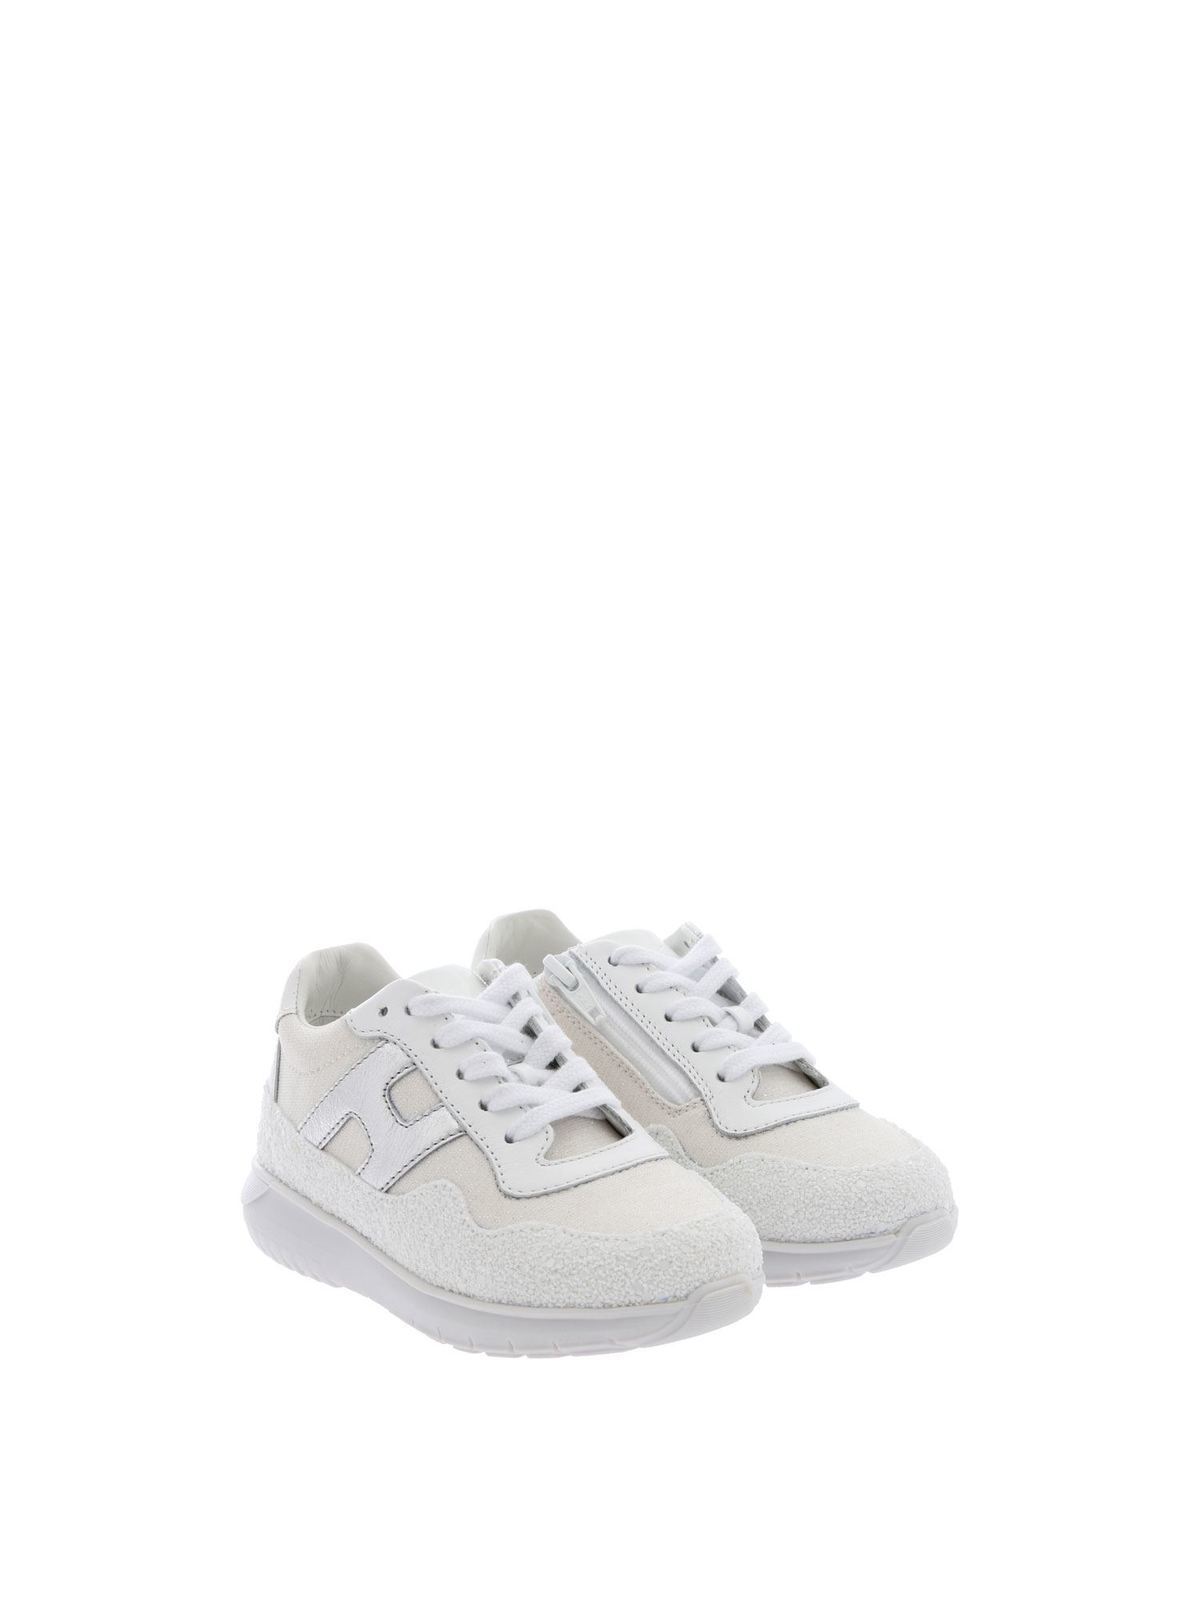 Hogan Junior - J371 sneakers in white glitter - trainers -  HXT3710AP30KY90351